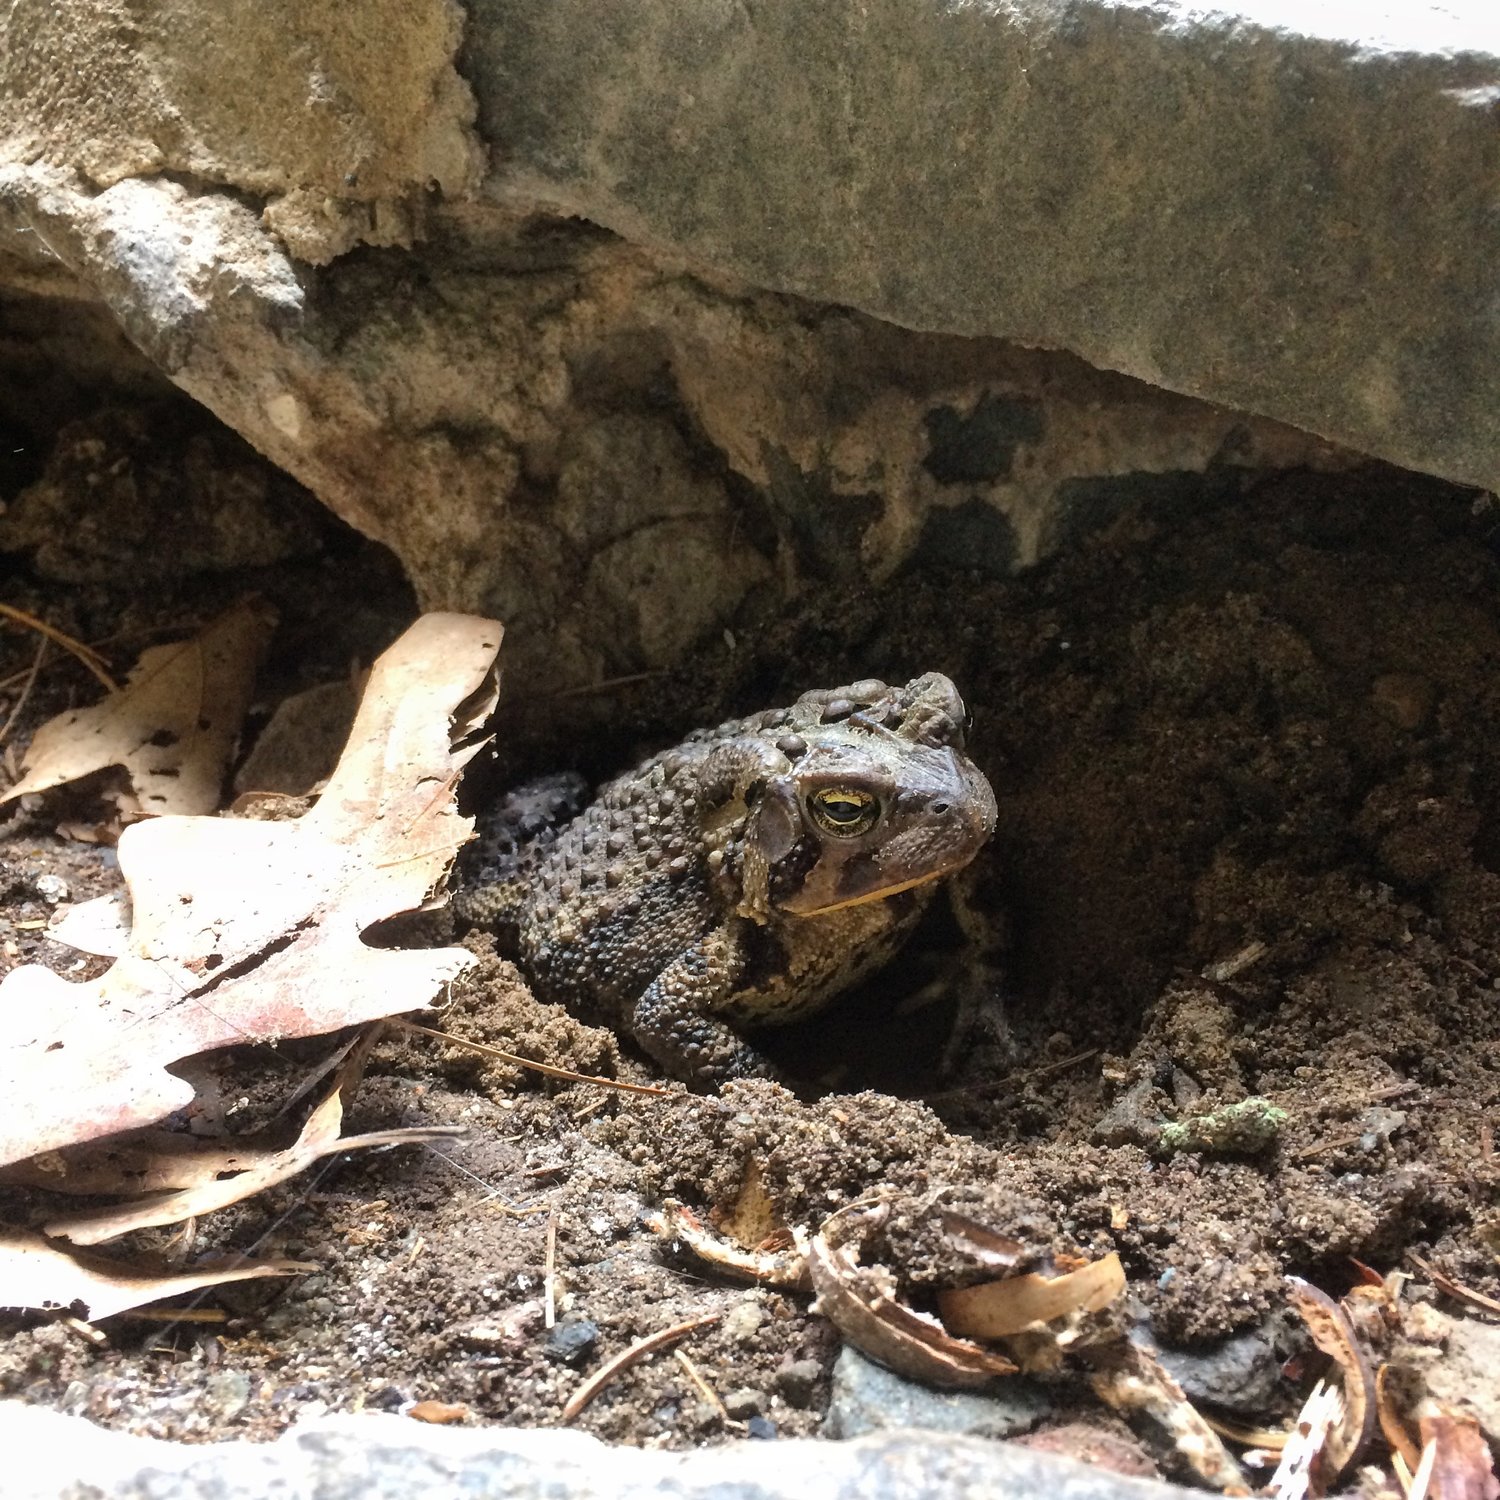 This eastern American toad cools off in the damp, shallow cavity it excavated in the crawlspace beneath our house.